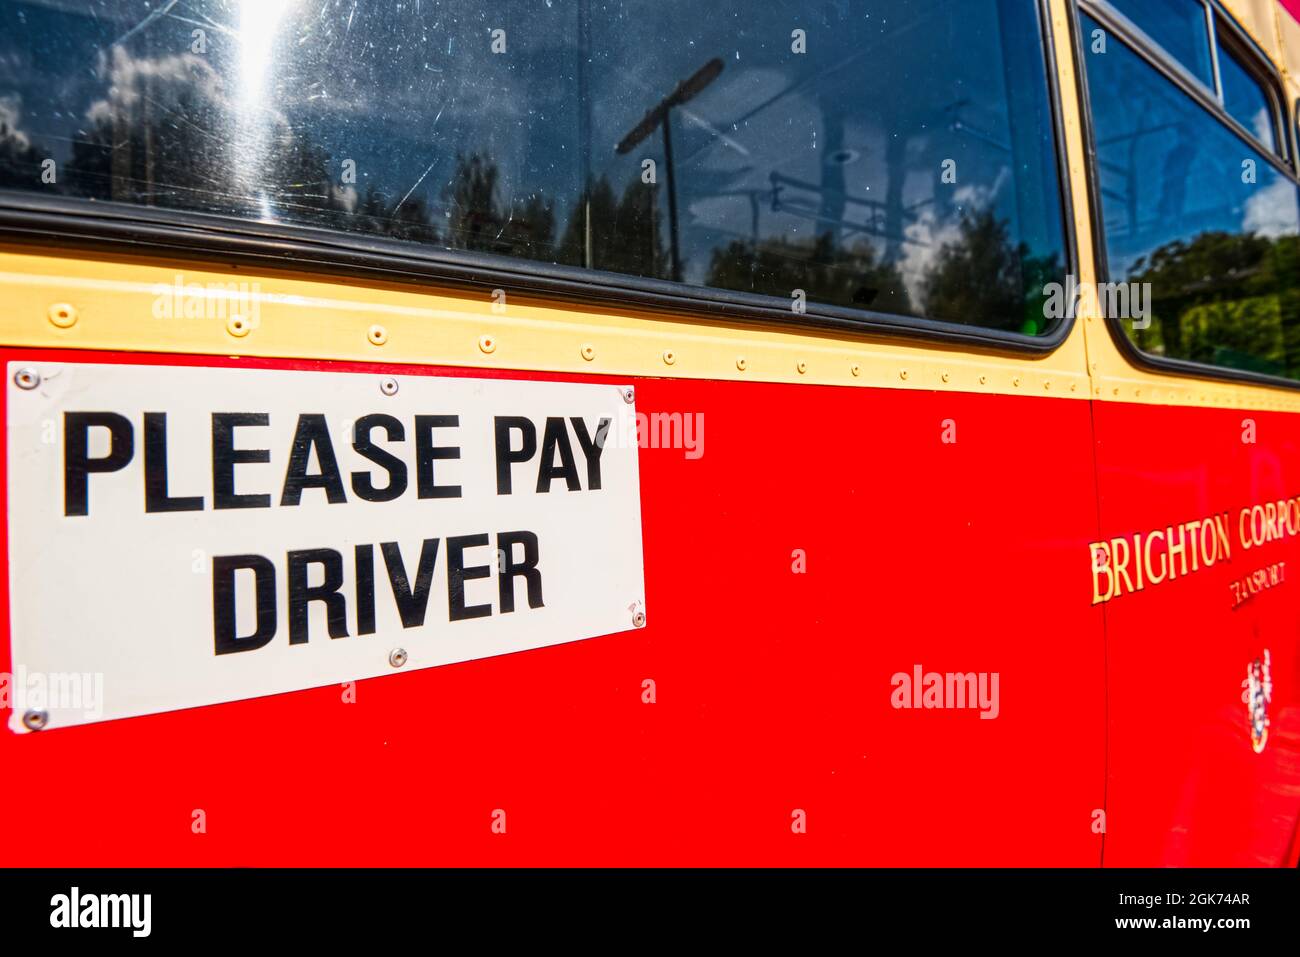 Please pay the driver sign on the side of a vintage bus, Winchester, UK Stock Photo